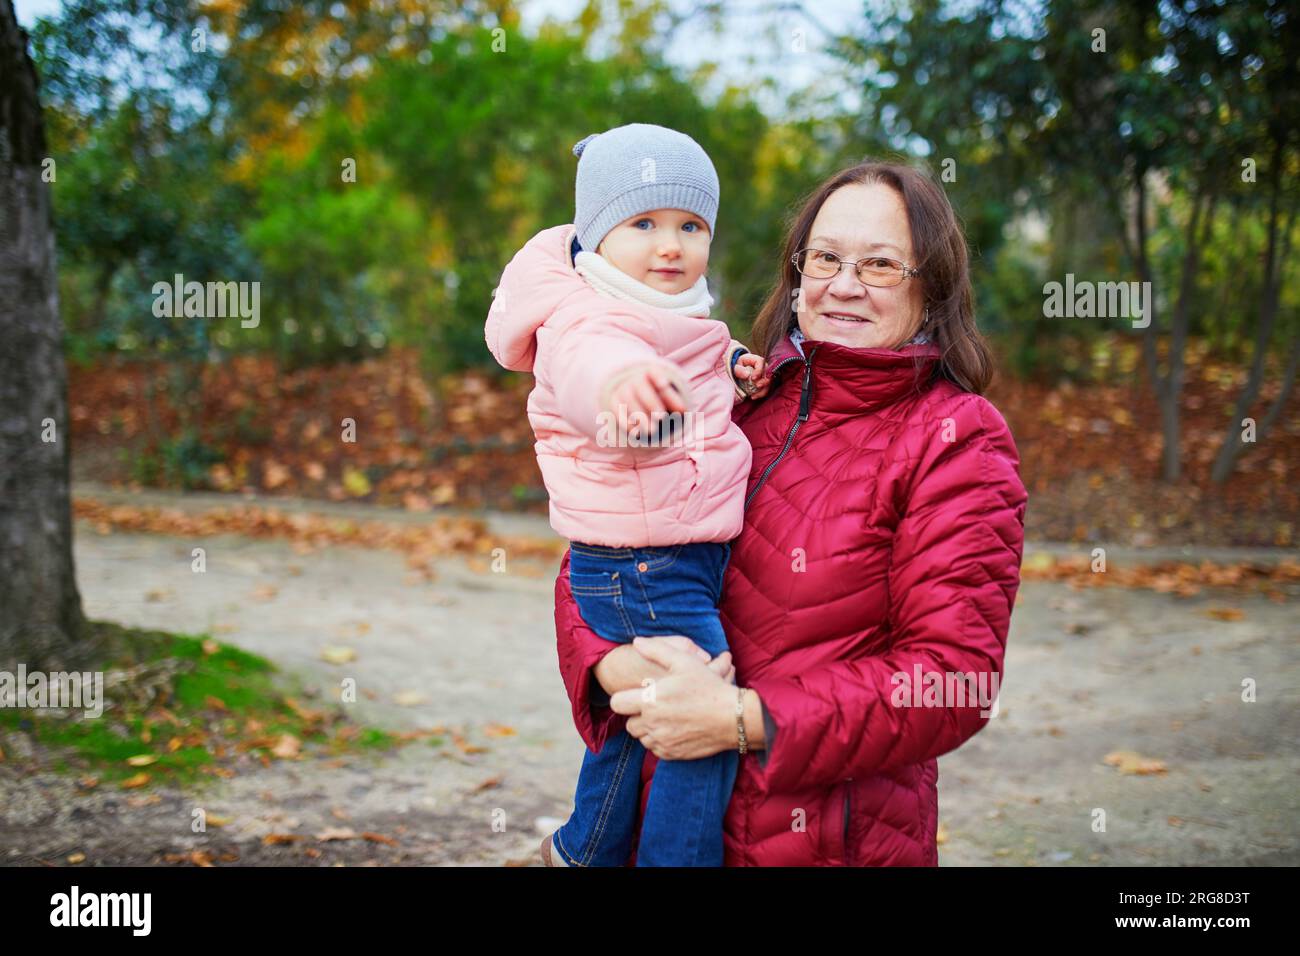 Happy smiling woman with toddler girl on fall day in park. Beautiful family of two in bright red foliage. Grandmother and granddaughter together. Autu Stock Photo